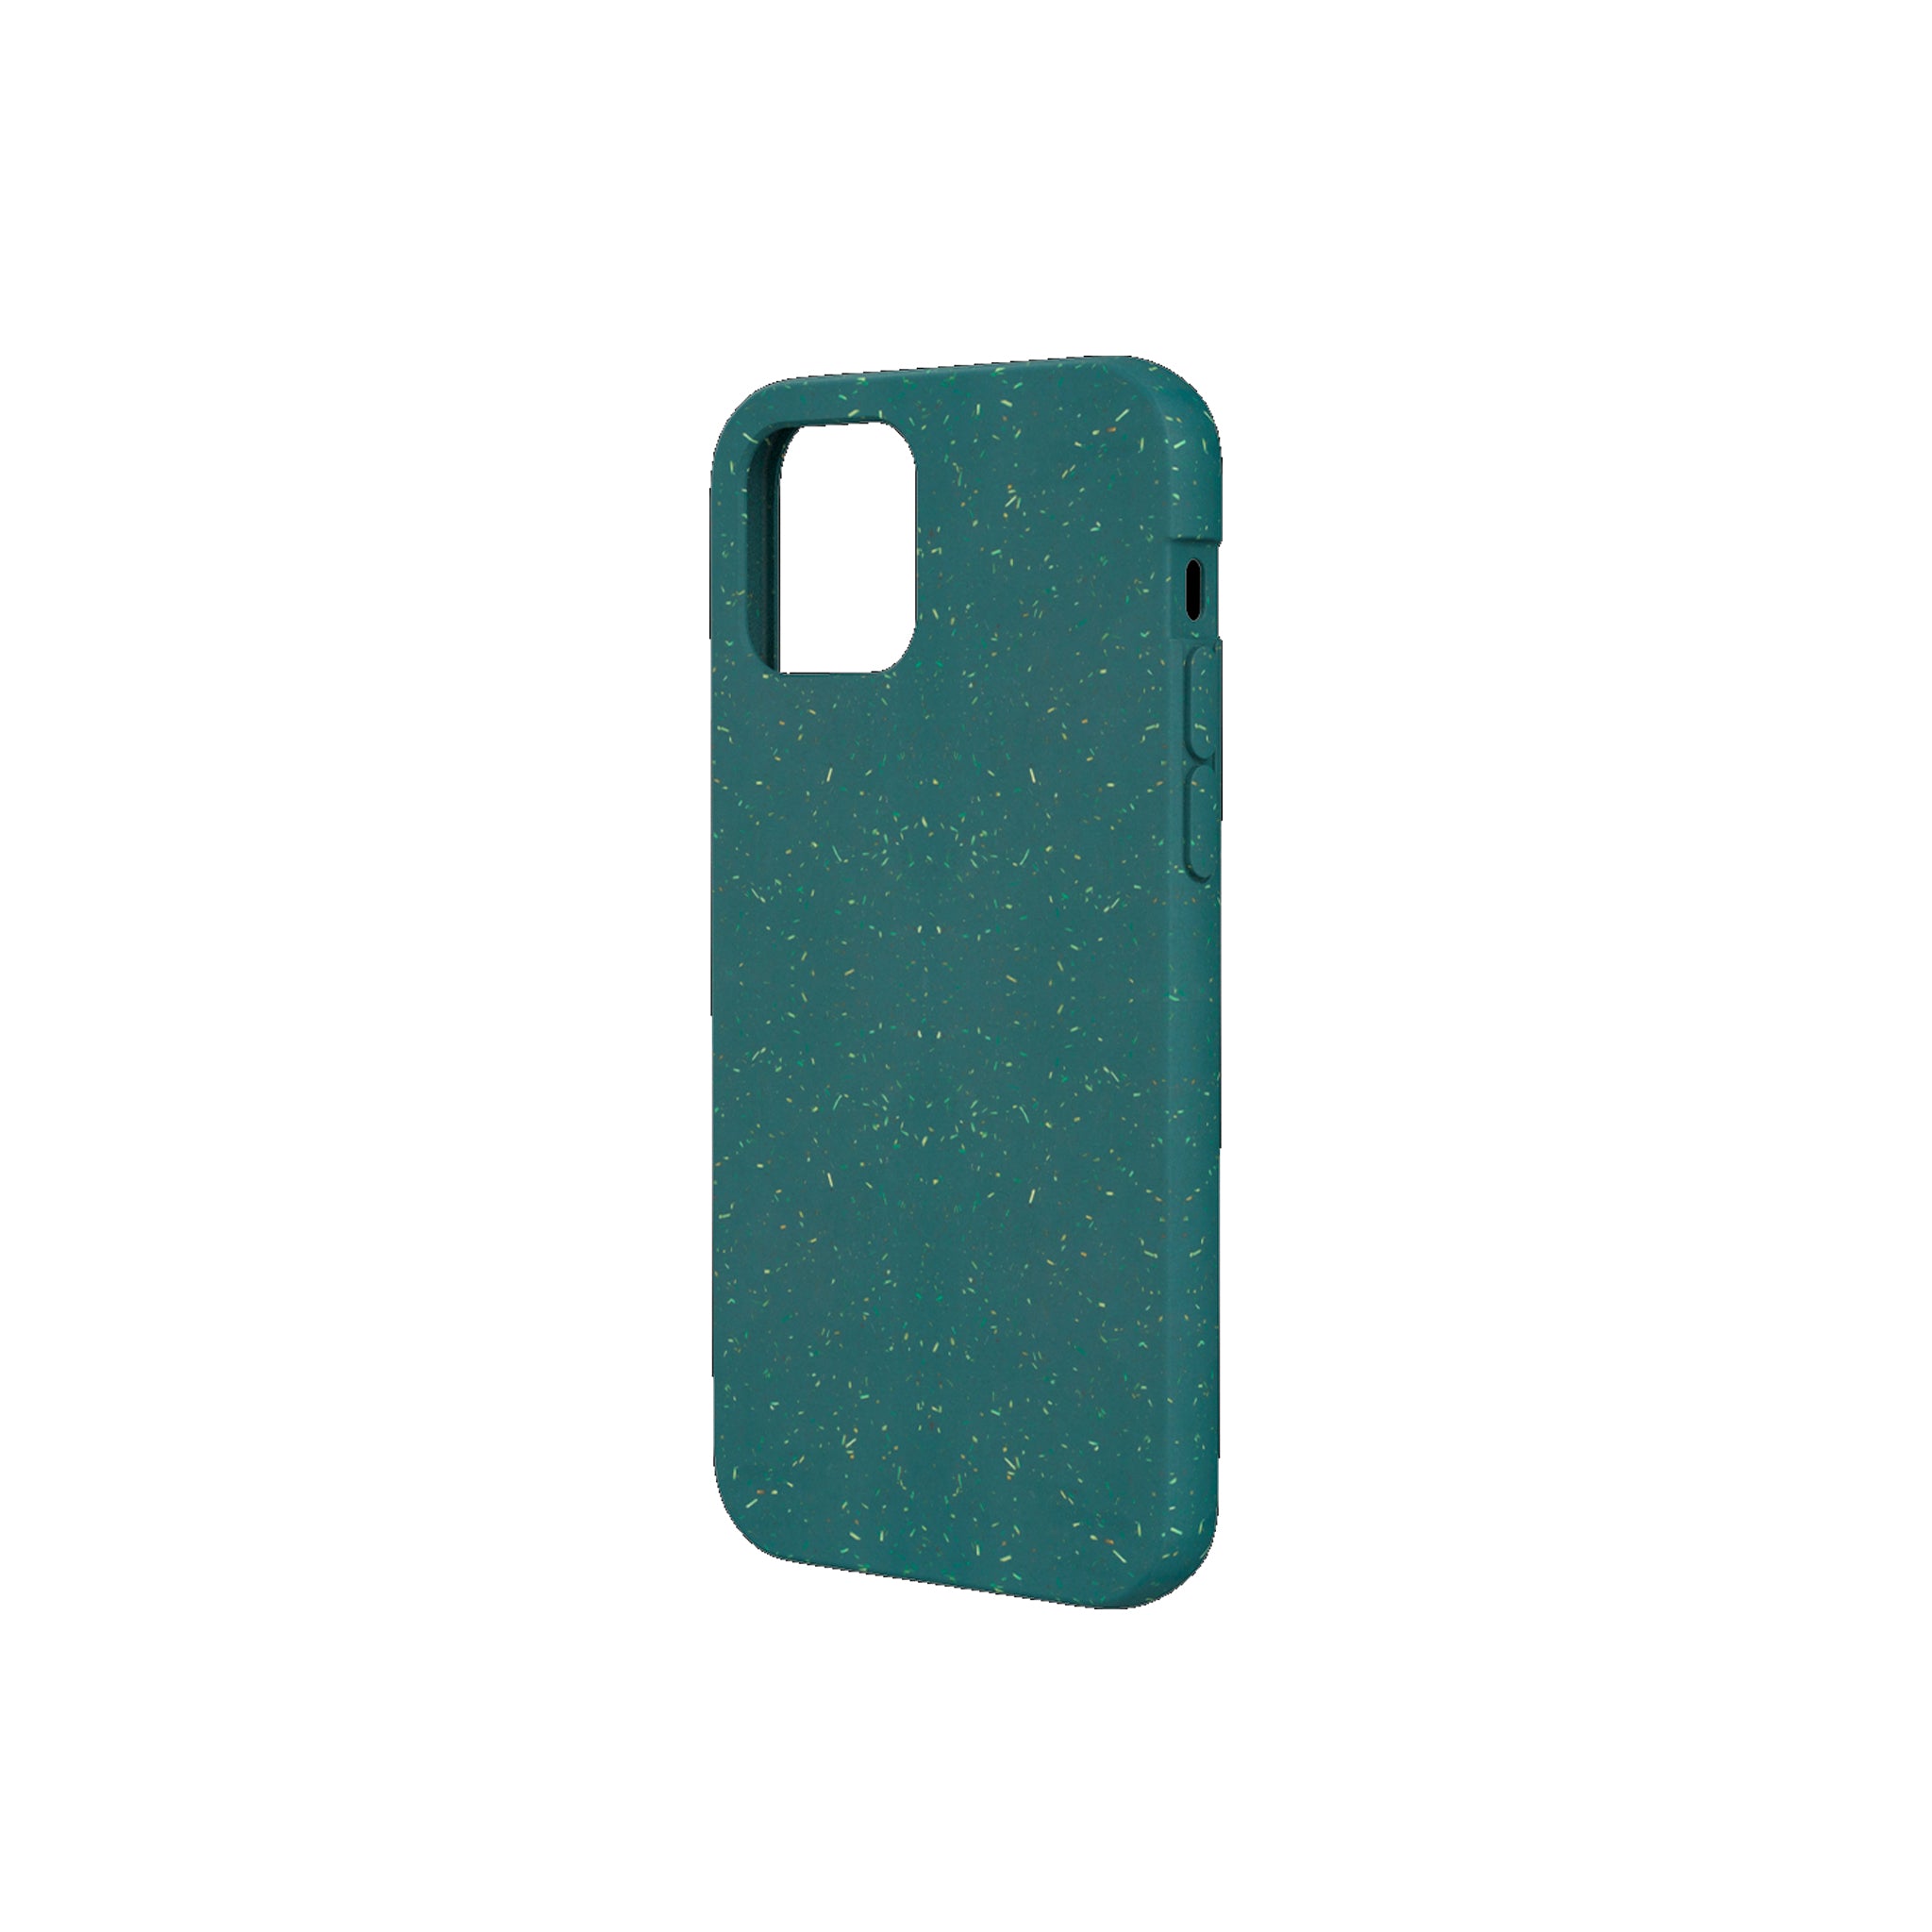 Pela - Eco Friendly Case For Apple Iphone 12 / 12 Pro - Green